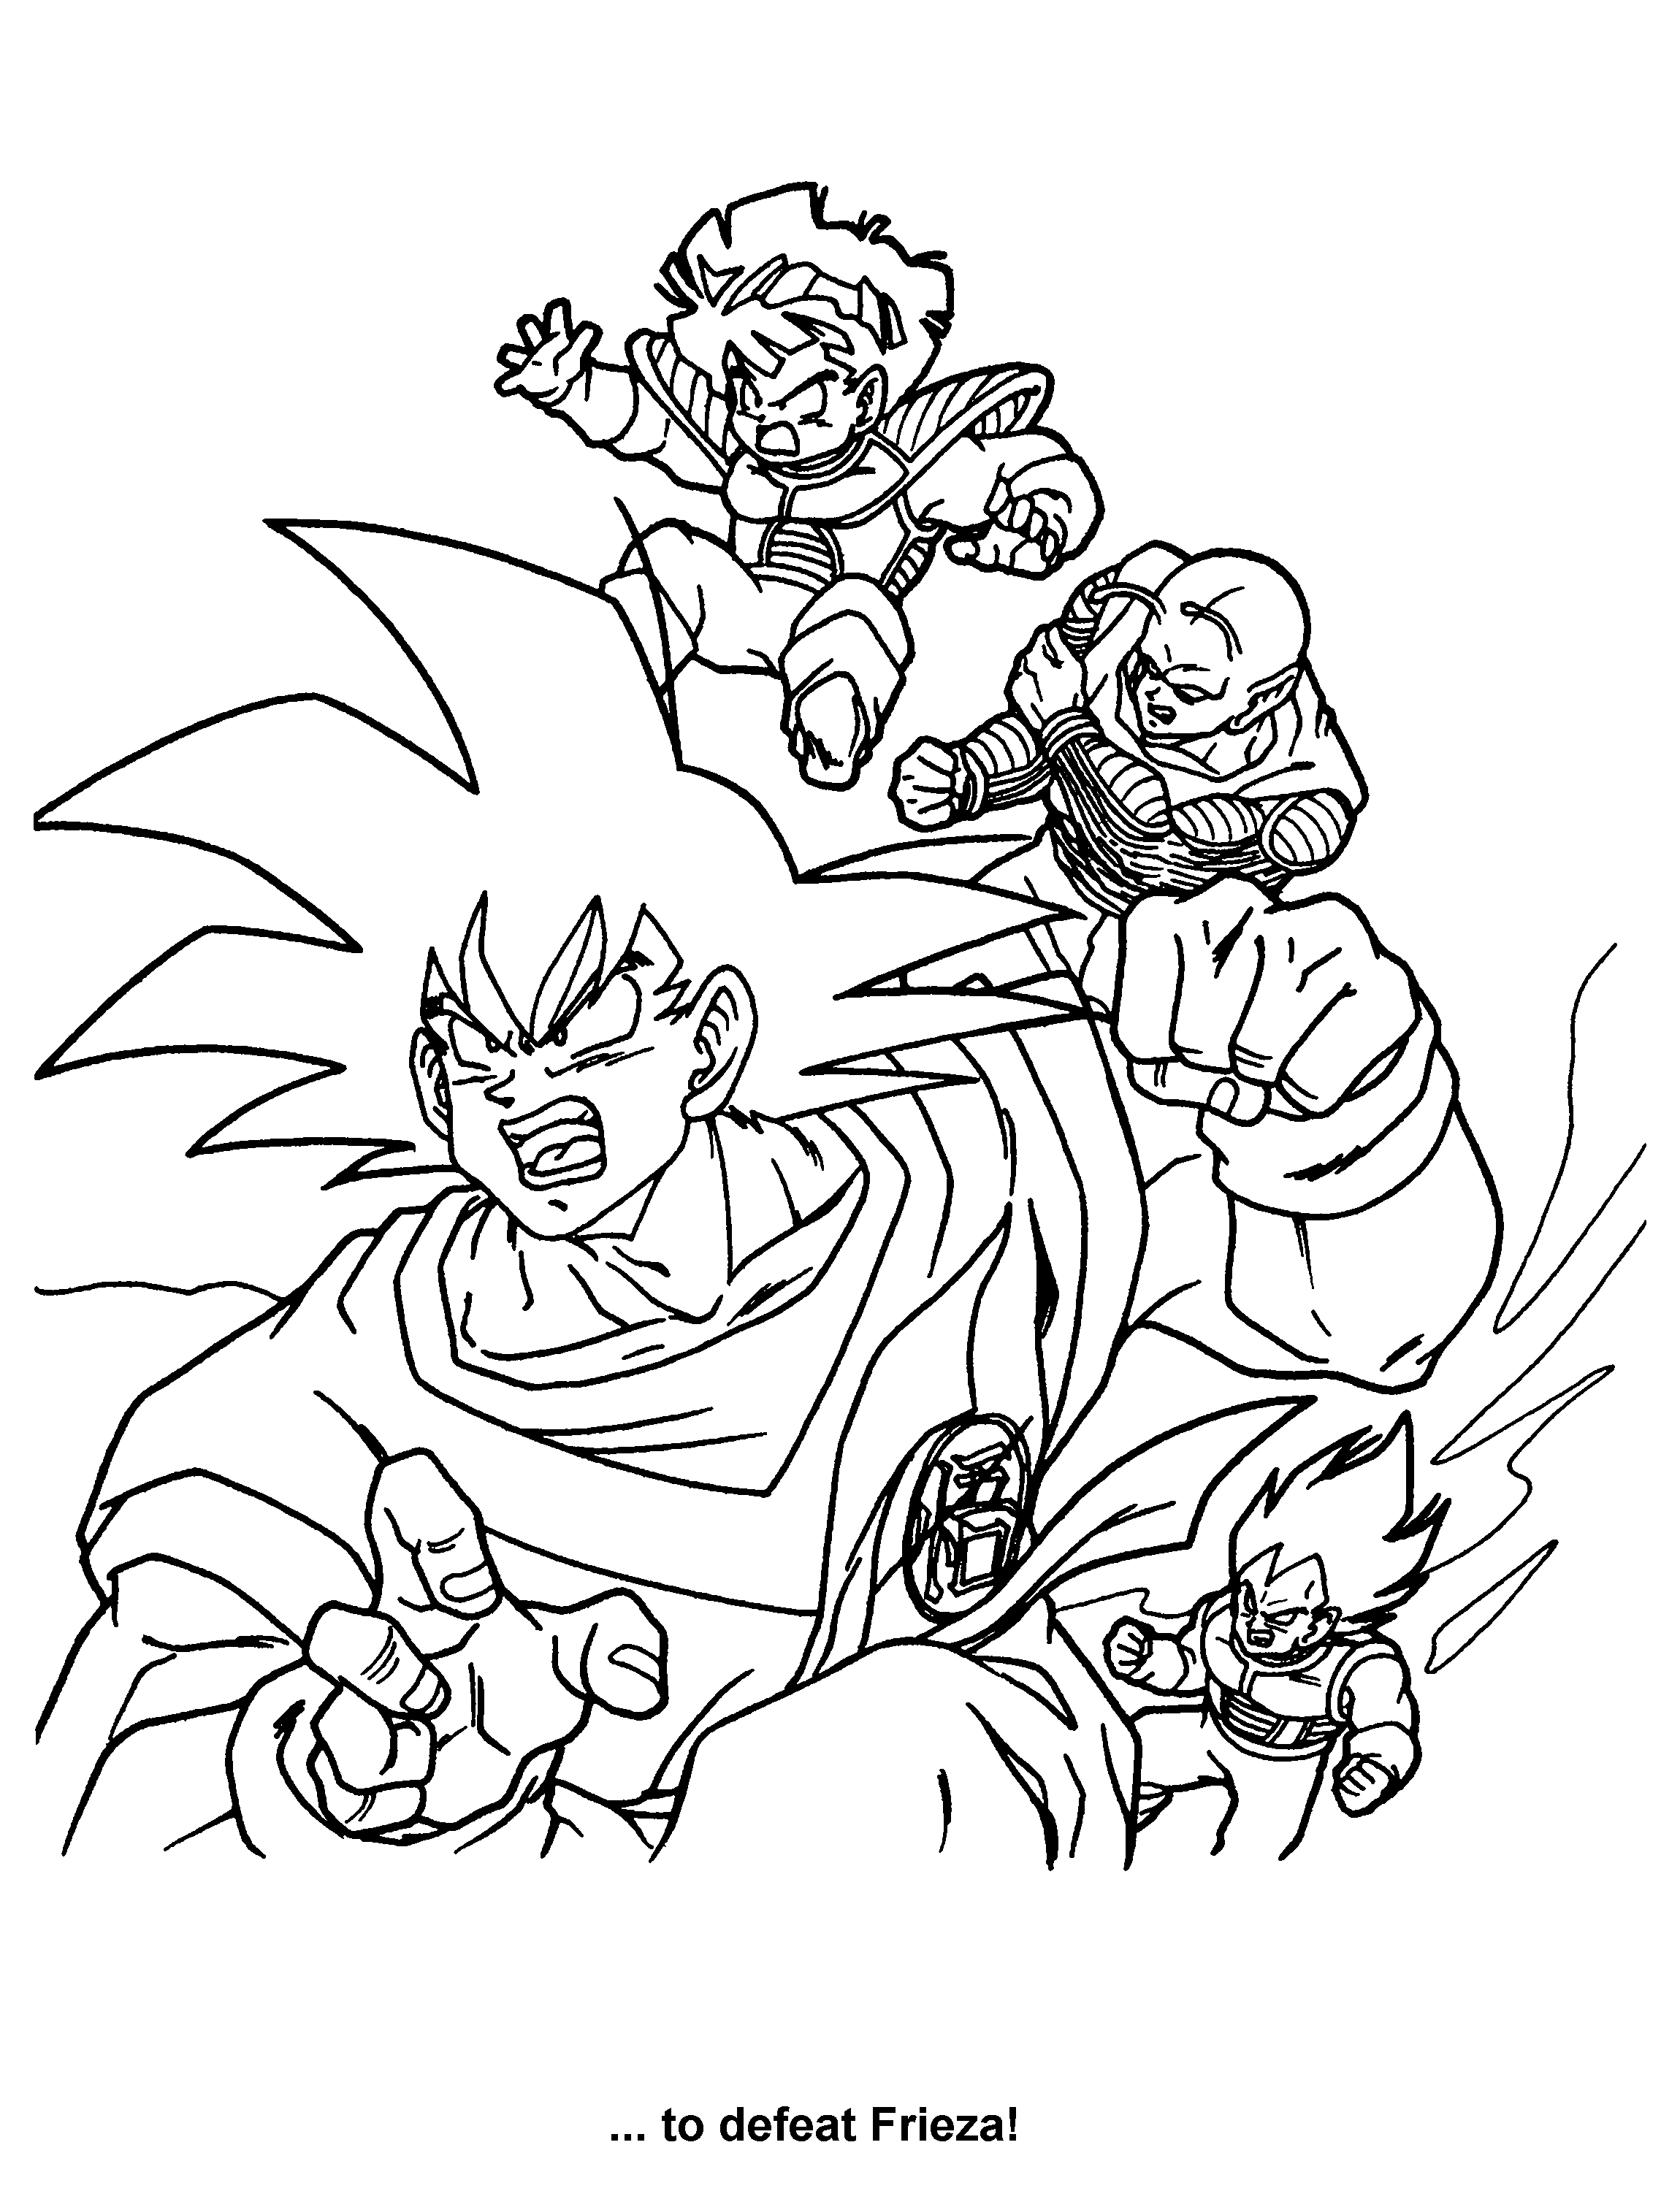 Coloring Page - Dragon ball z coloring pages 24